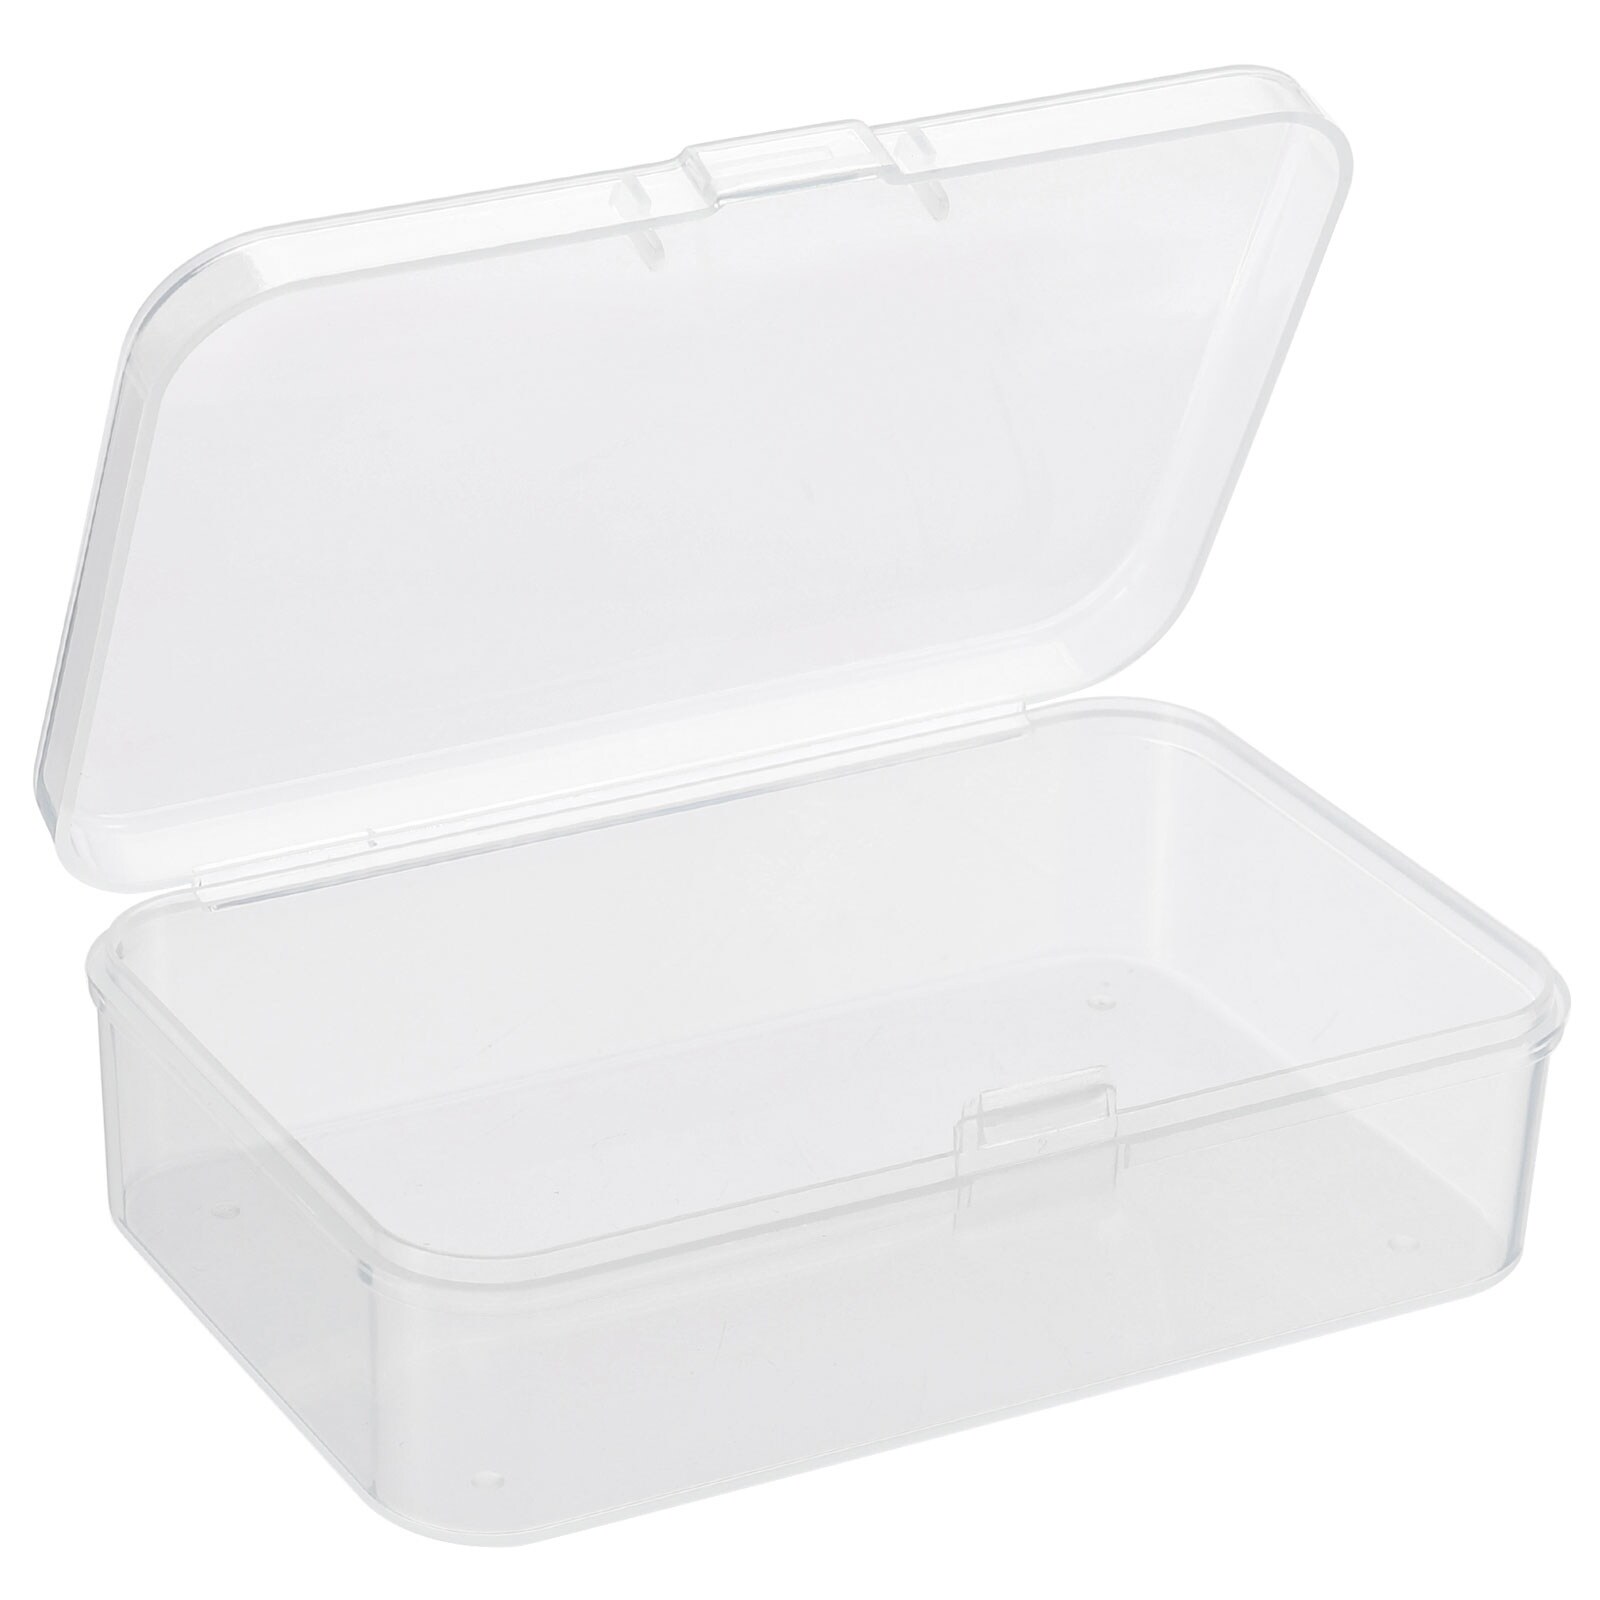 https://ak1.ostkcdn.com/images/products/is/images/direct/b287150ddb10b3da607f99e87d061ecd96f6e3df/10pcs-Clear-Storage-Container-w-Hinged-Lid-85x55x25mm-Plastic-Rectangular-Box.jpg